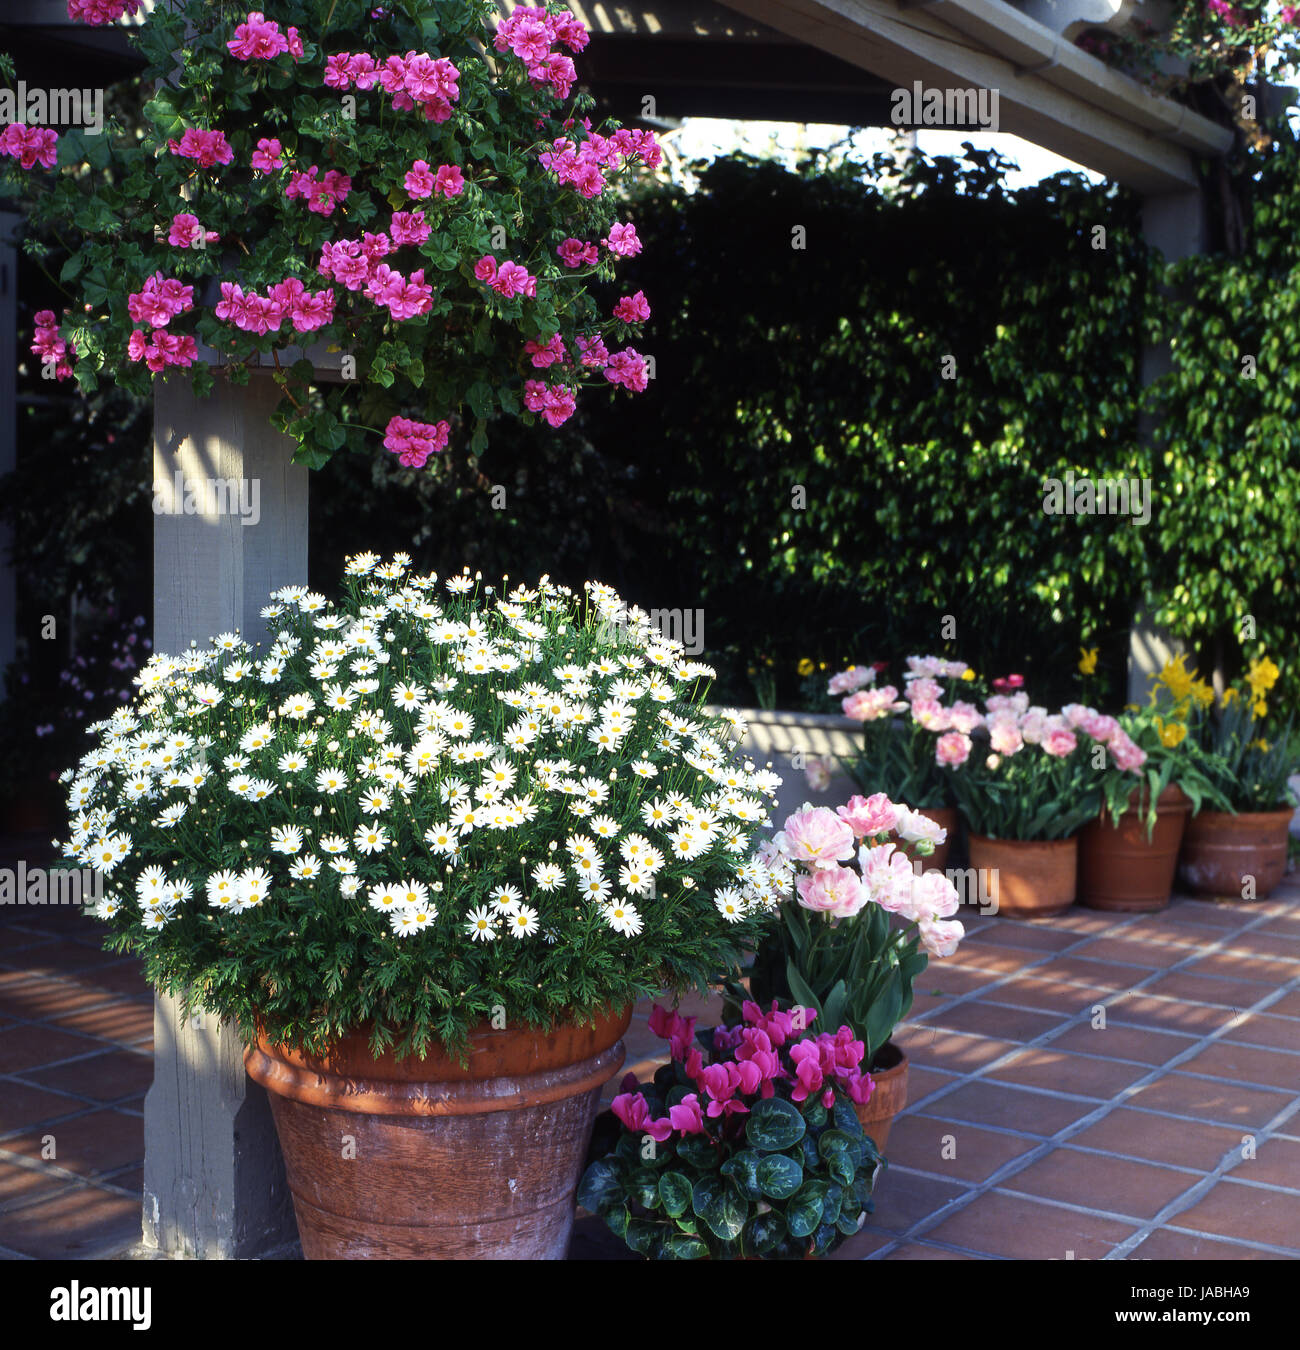 Small courtyard garden with pots of daisies, cyclamen, tulips and pelargoniums, Australia Stock Photo